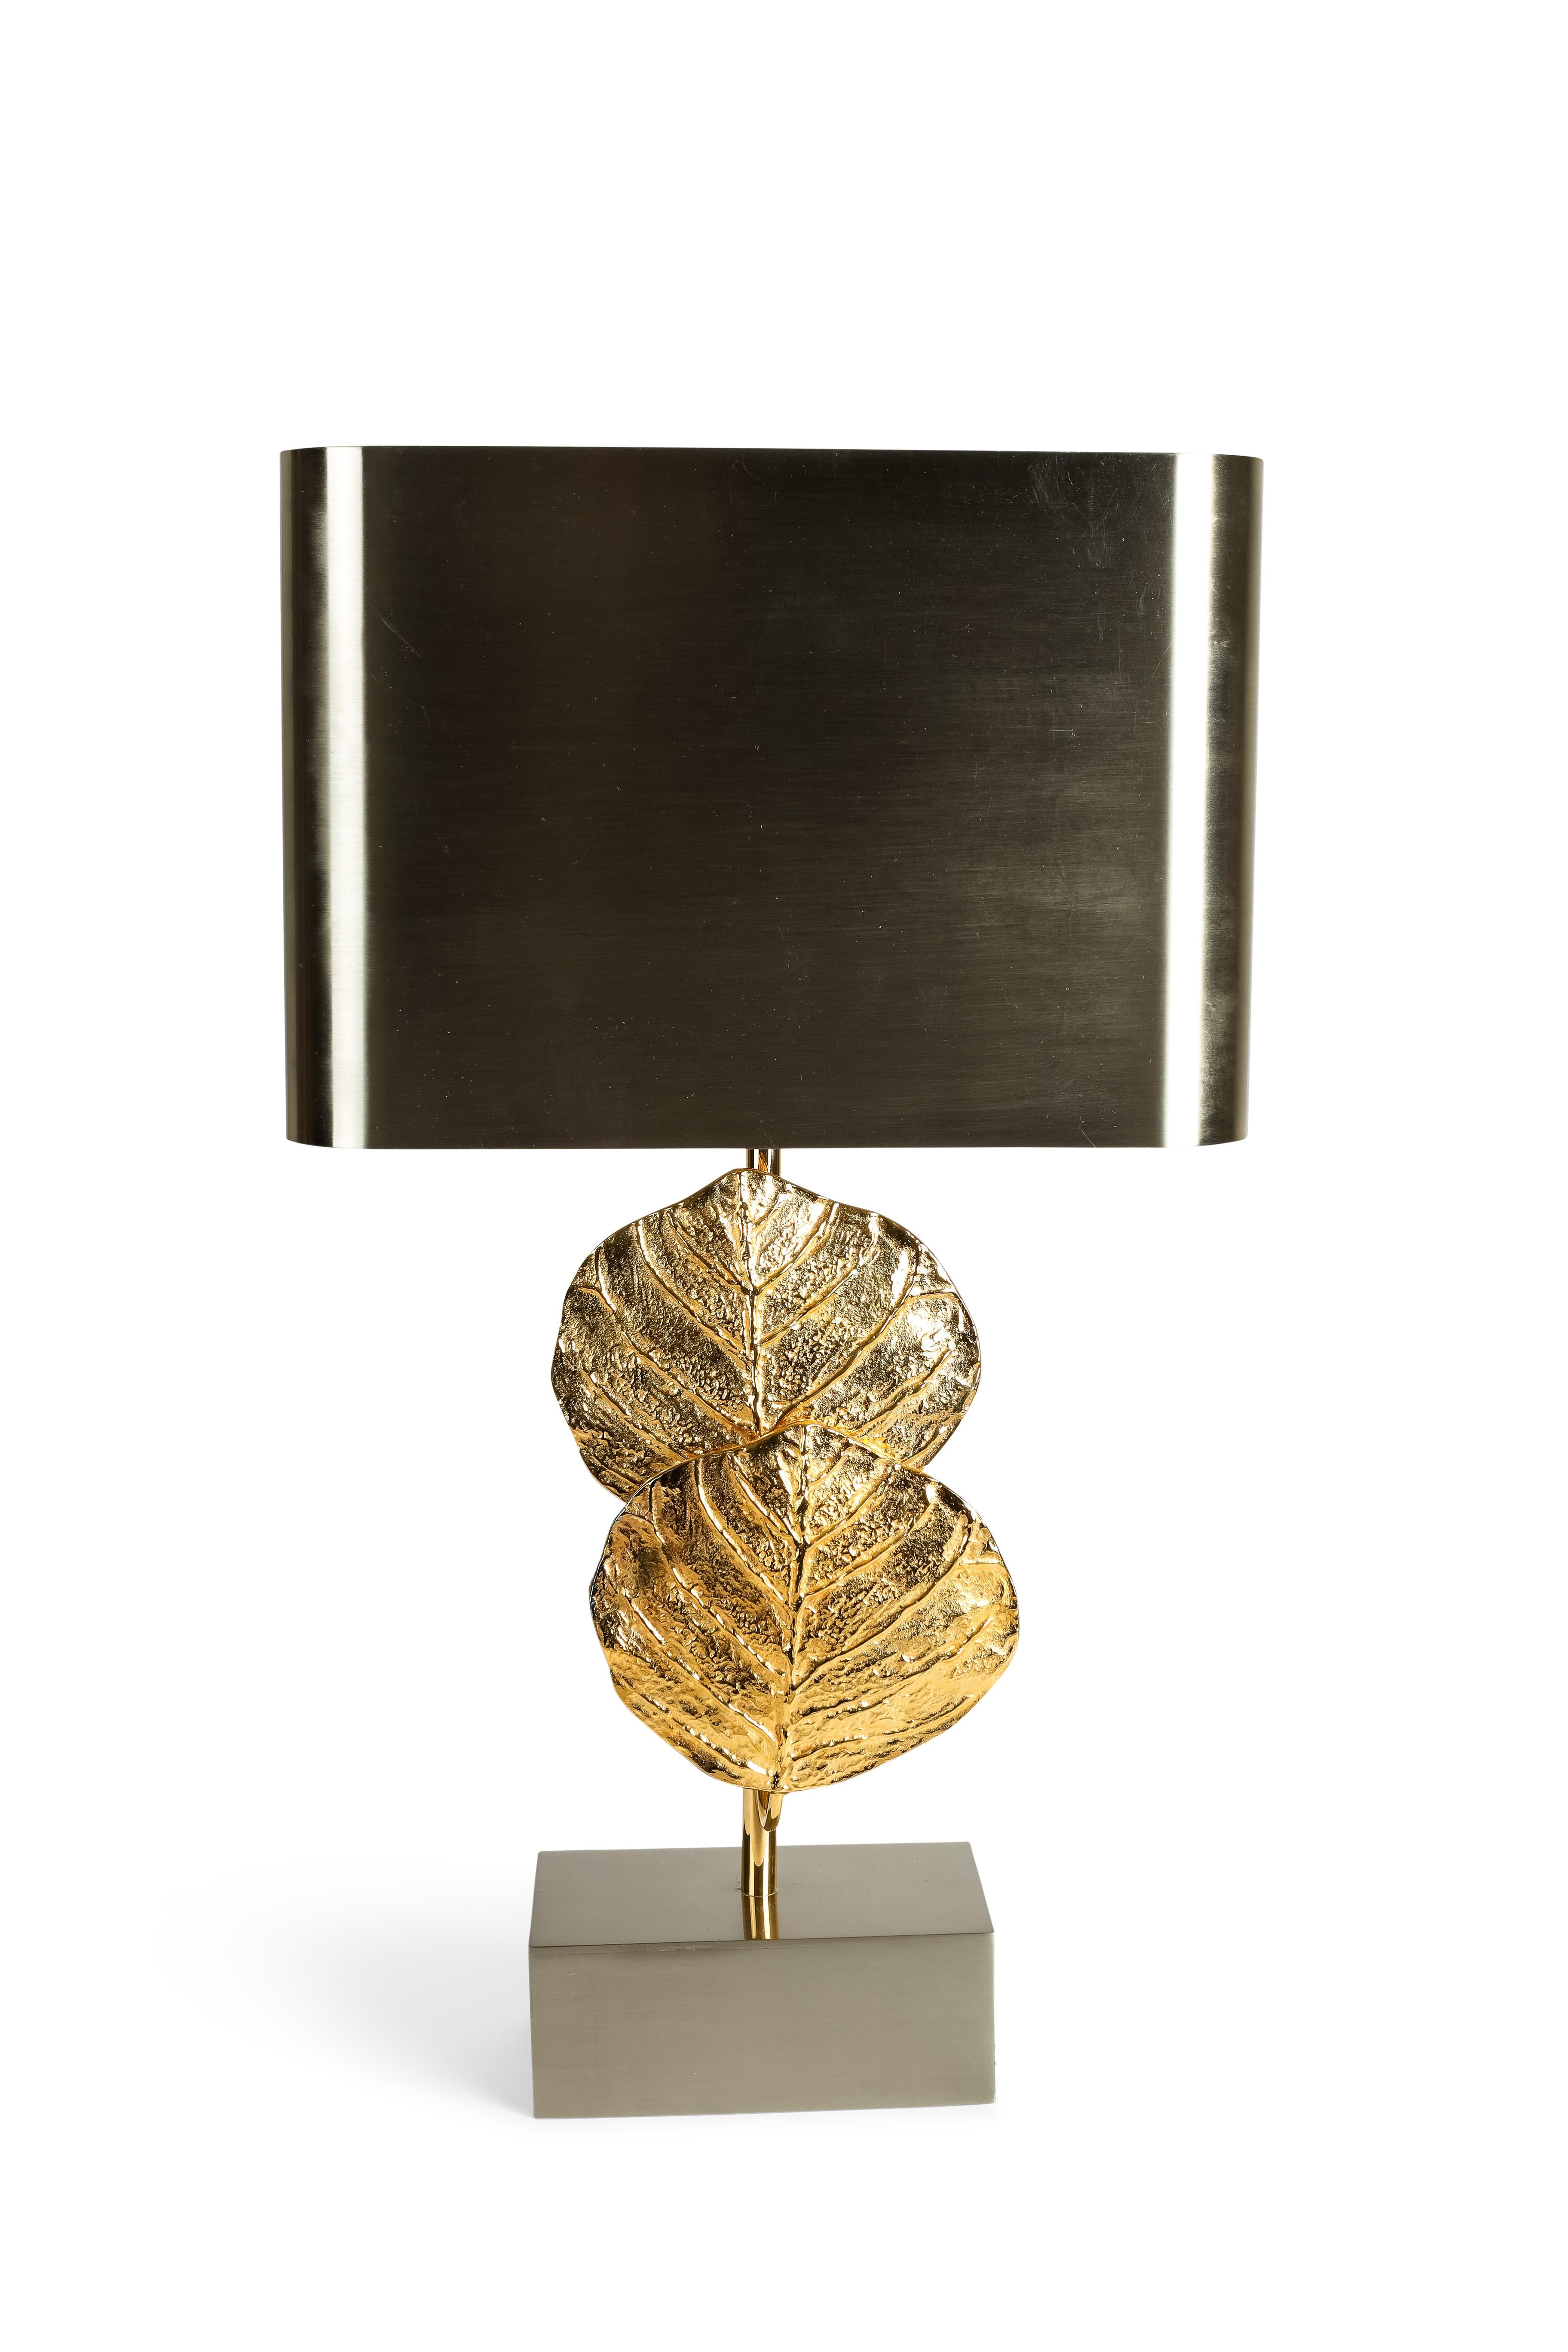 These lamps were designed by Christiane Charles for Maison Charles in 1970. There are documented in their catalogue. The bases and the shades have a silver patina while the central 2 leaves are in gilded bronze. American wired and signed. They have